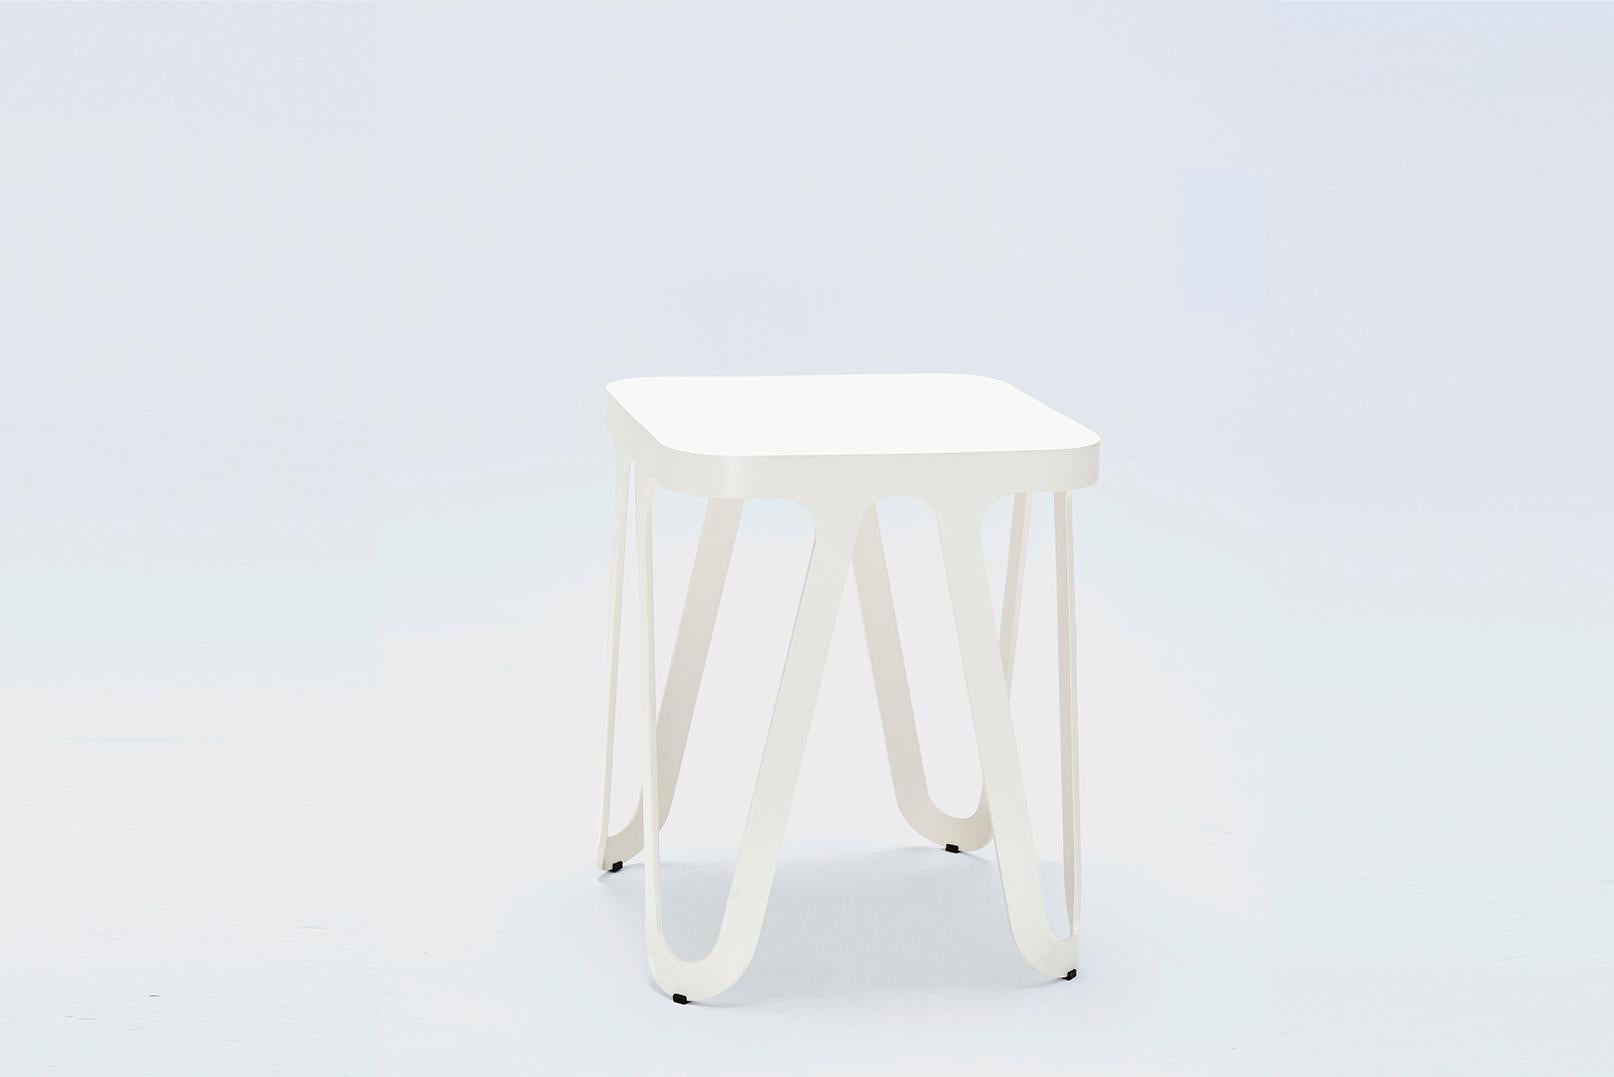 White Loop stool by Sebastian Scherer
Dimensions: D38 x W38 x H44 cm
Material: Aluminium
Weight 3.5 kg
Also available in wood.
Also available in colours: ocean blue, silk grey, jet black, coral red, lemon yellow, rose, signal white.

The Loop